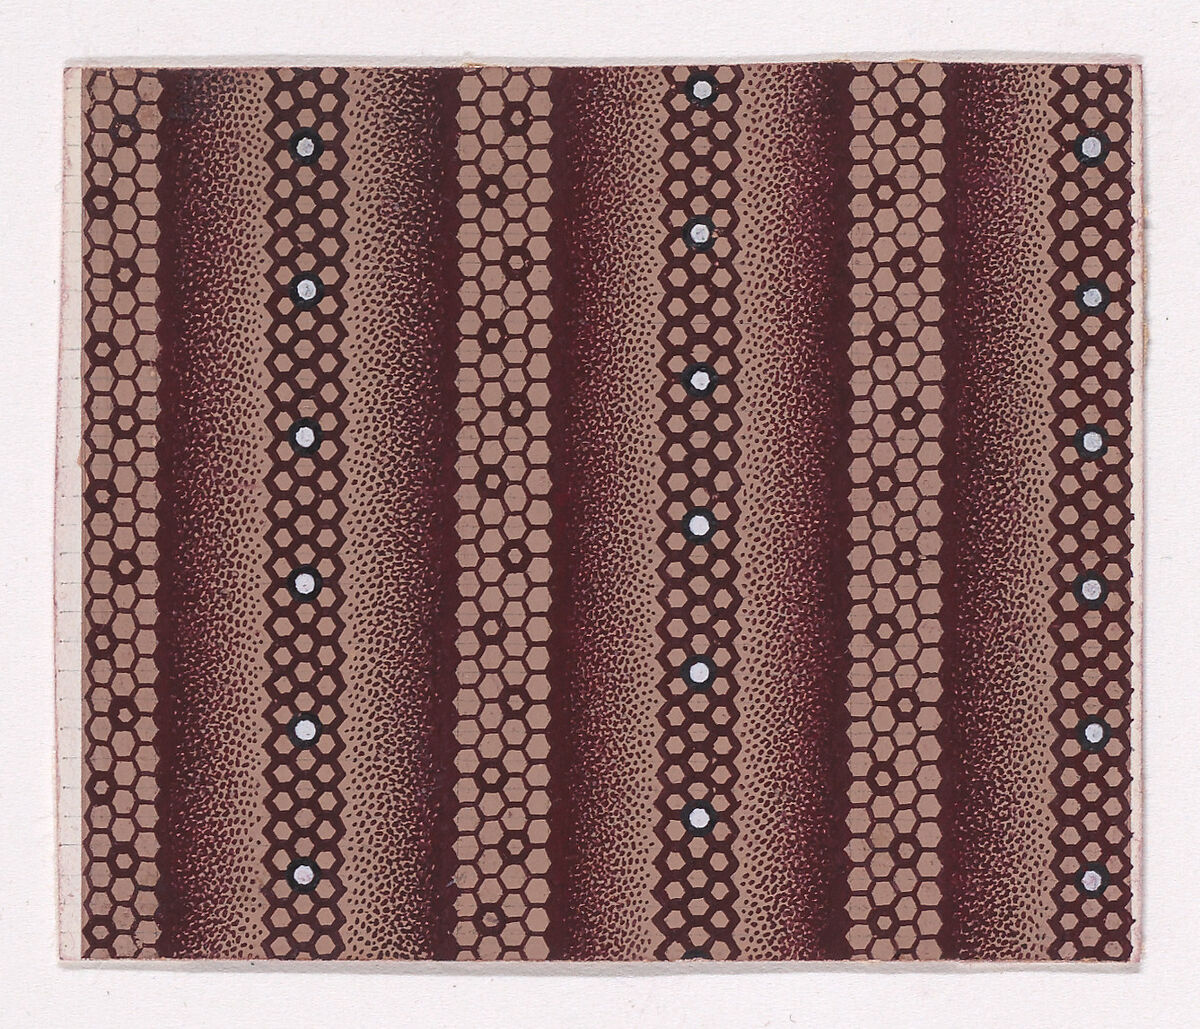 Textile Design with Alternating Vertical Stripes of Honeycomb Patterns Decorated with Pearls, Anonymous, Alsatian, 19th century, Gouache 